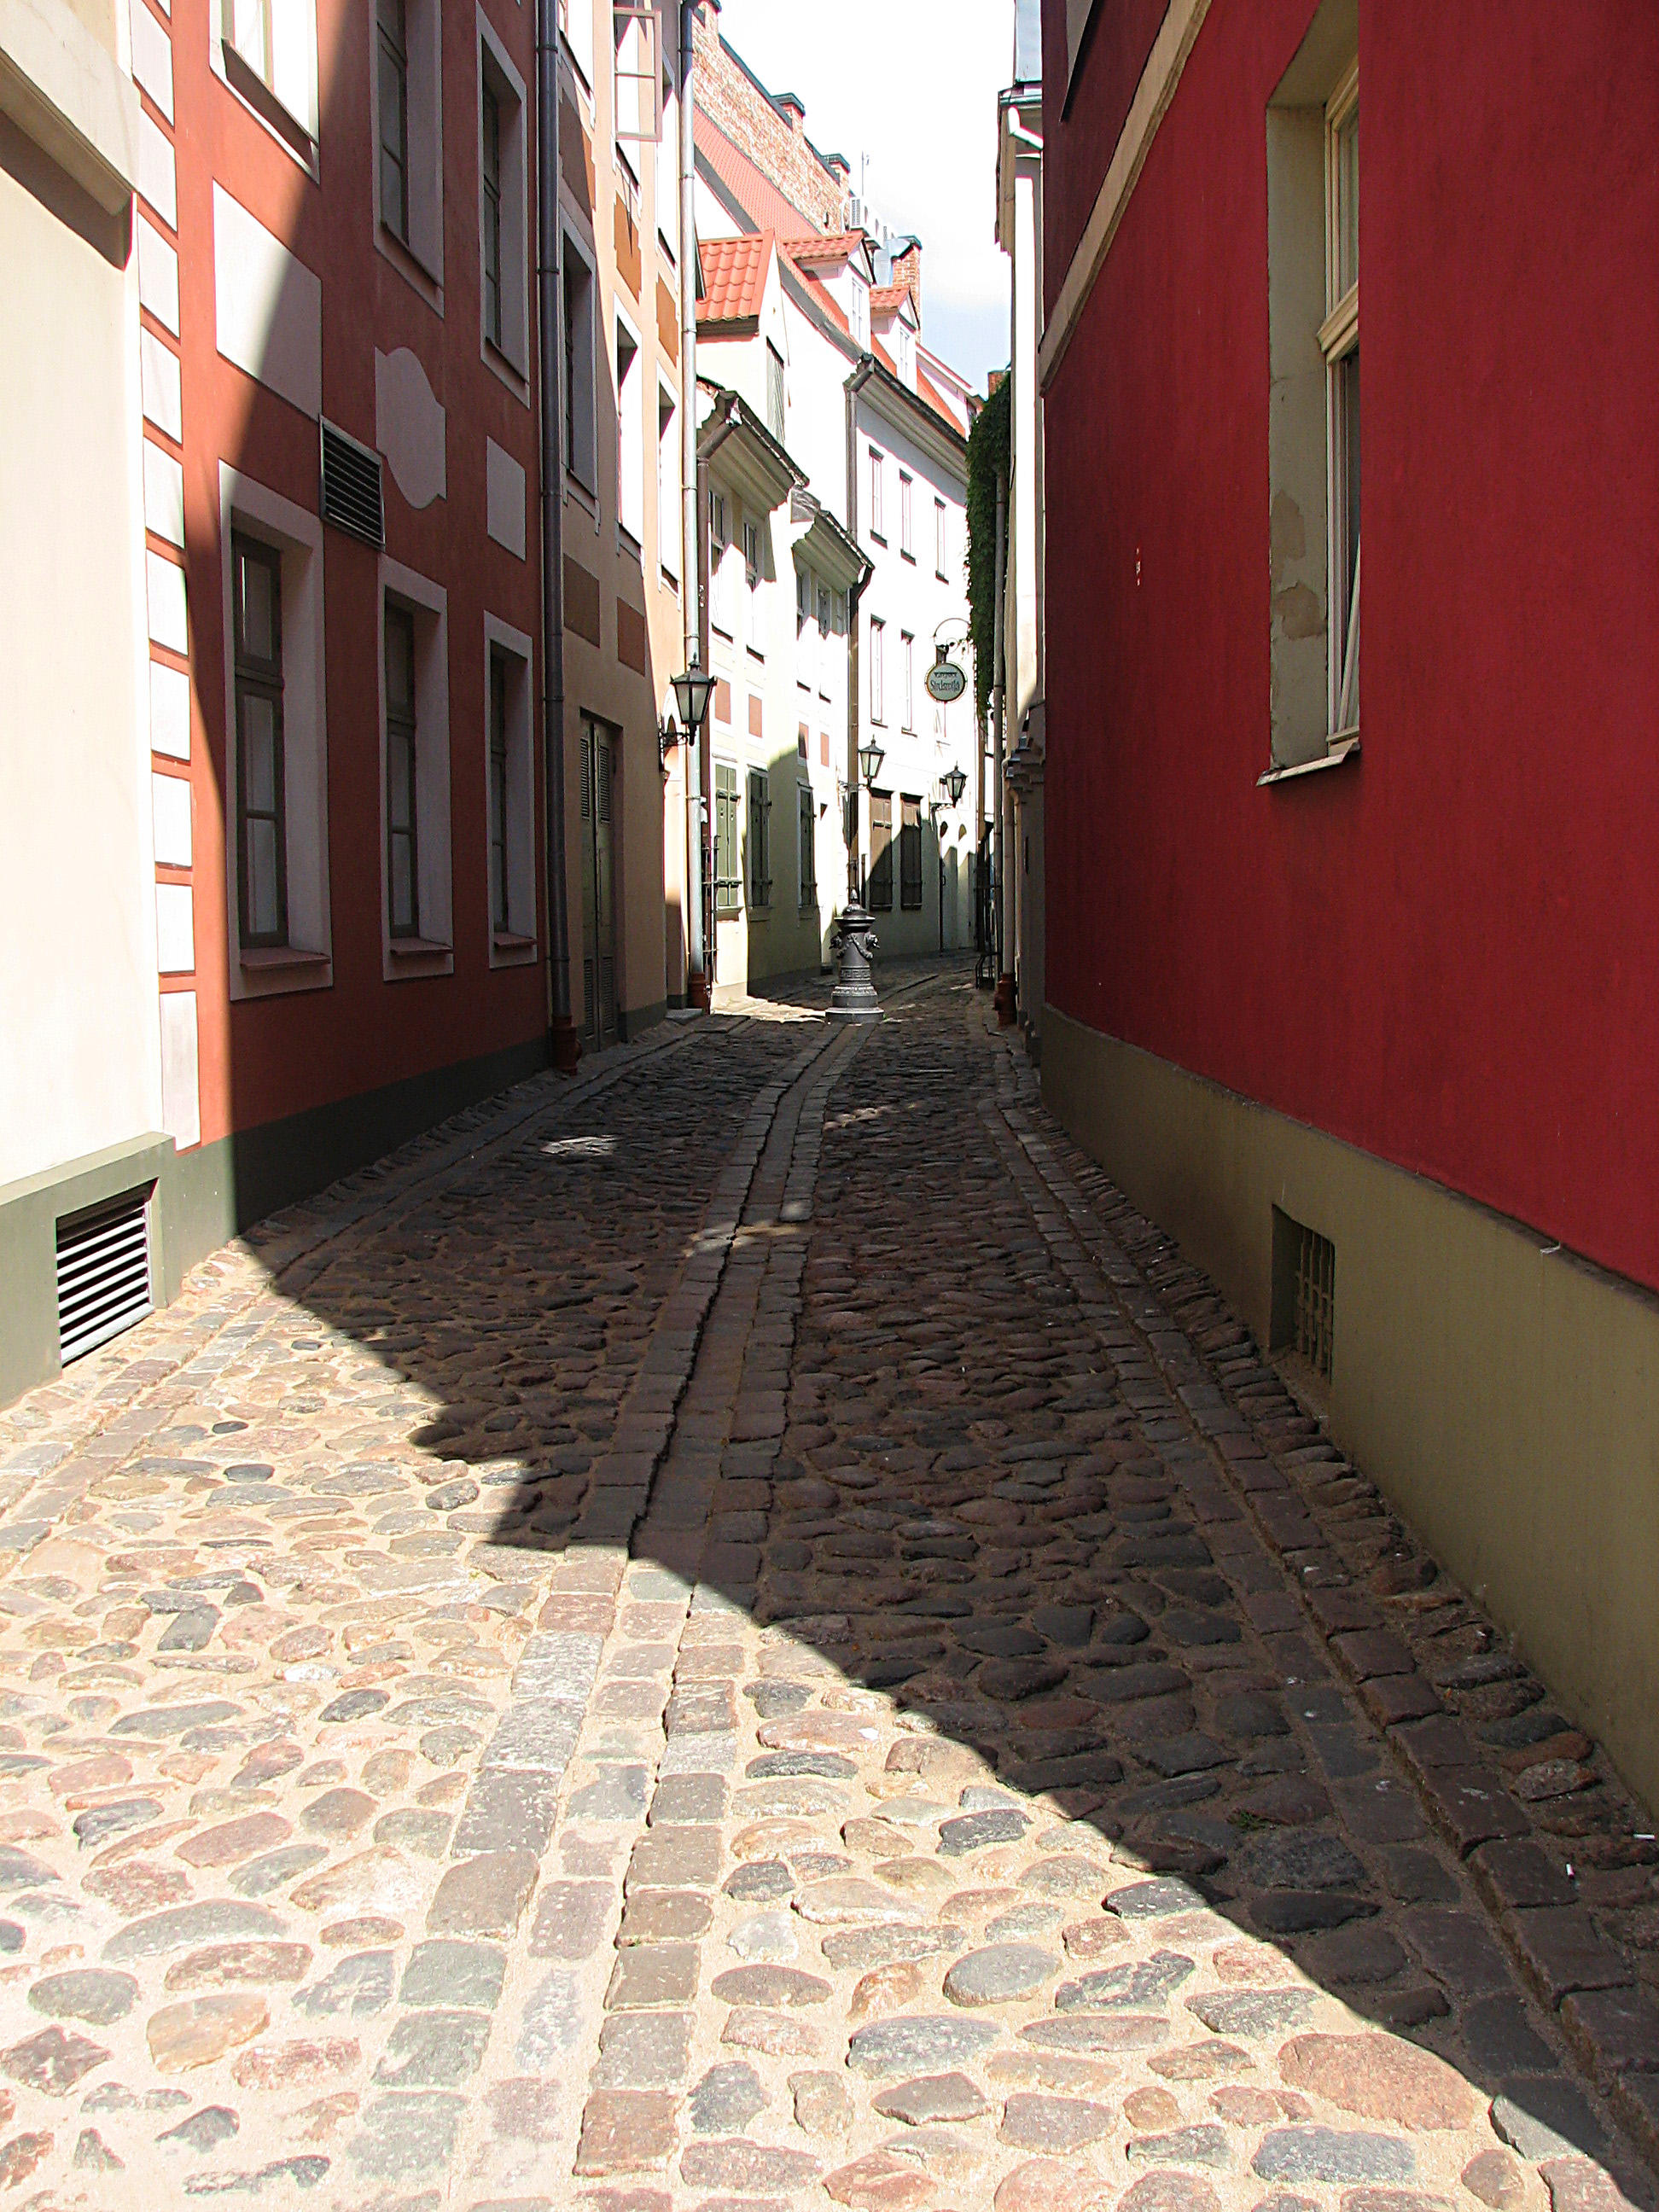 One of the many cobblestone roads